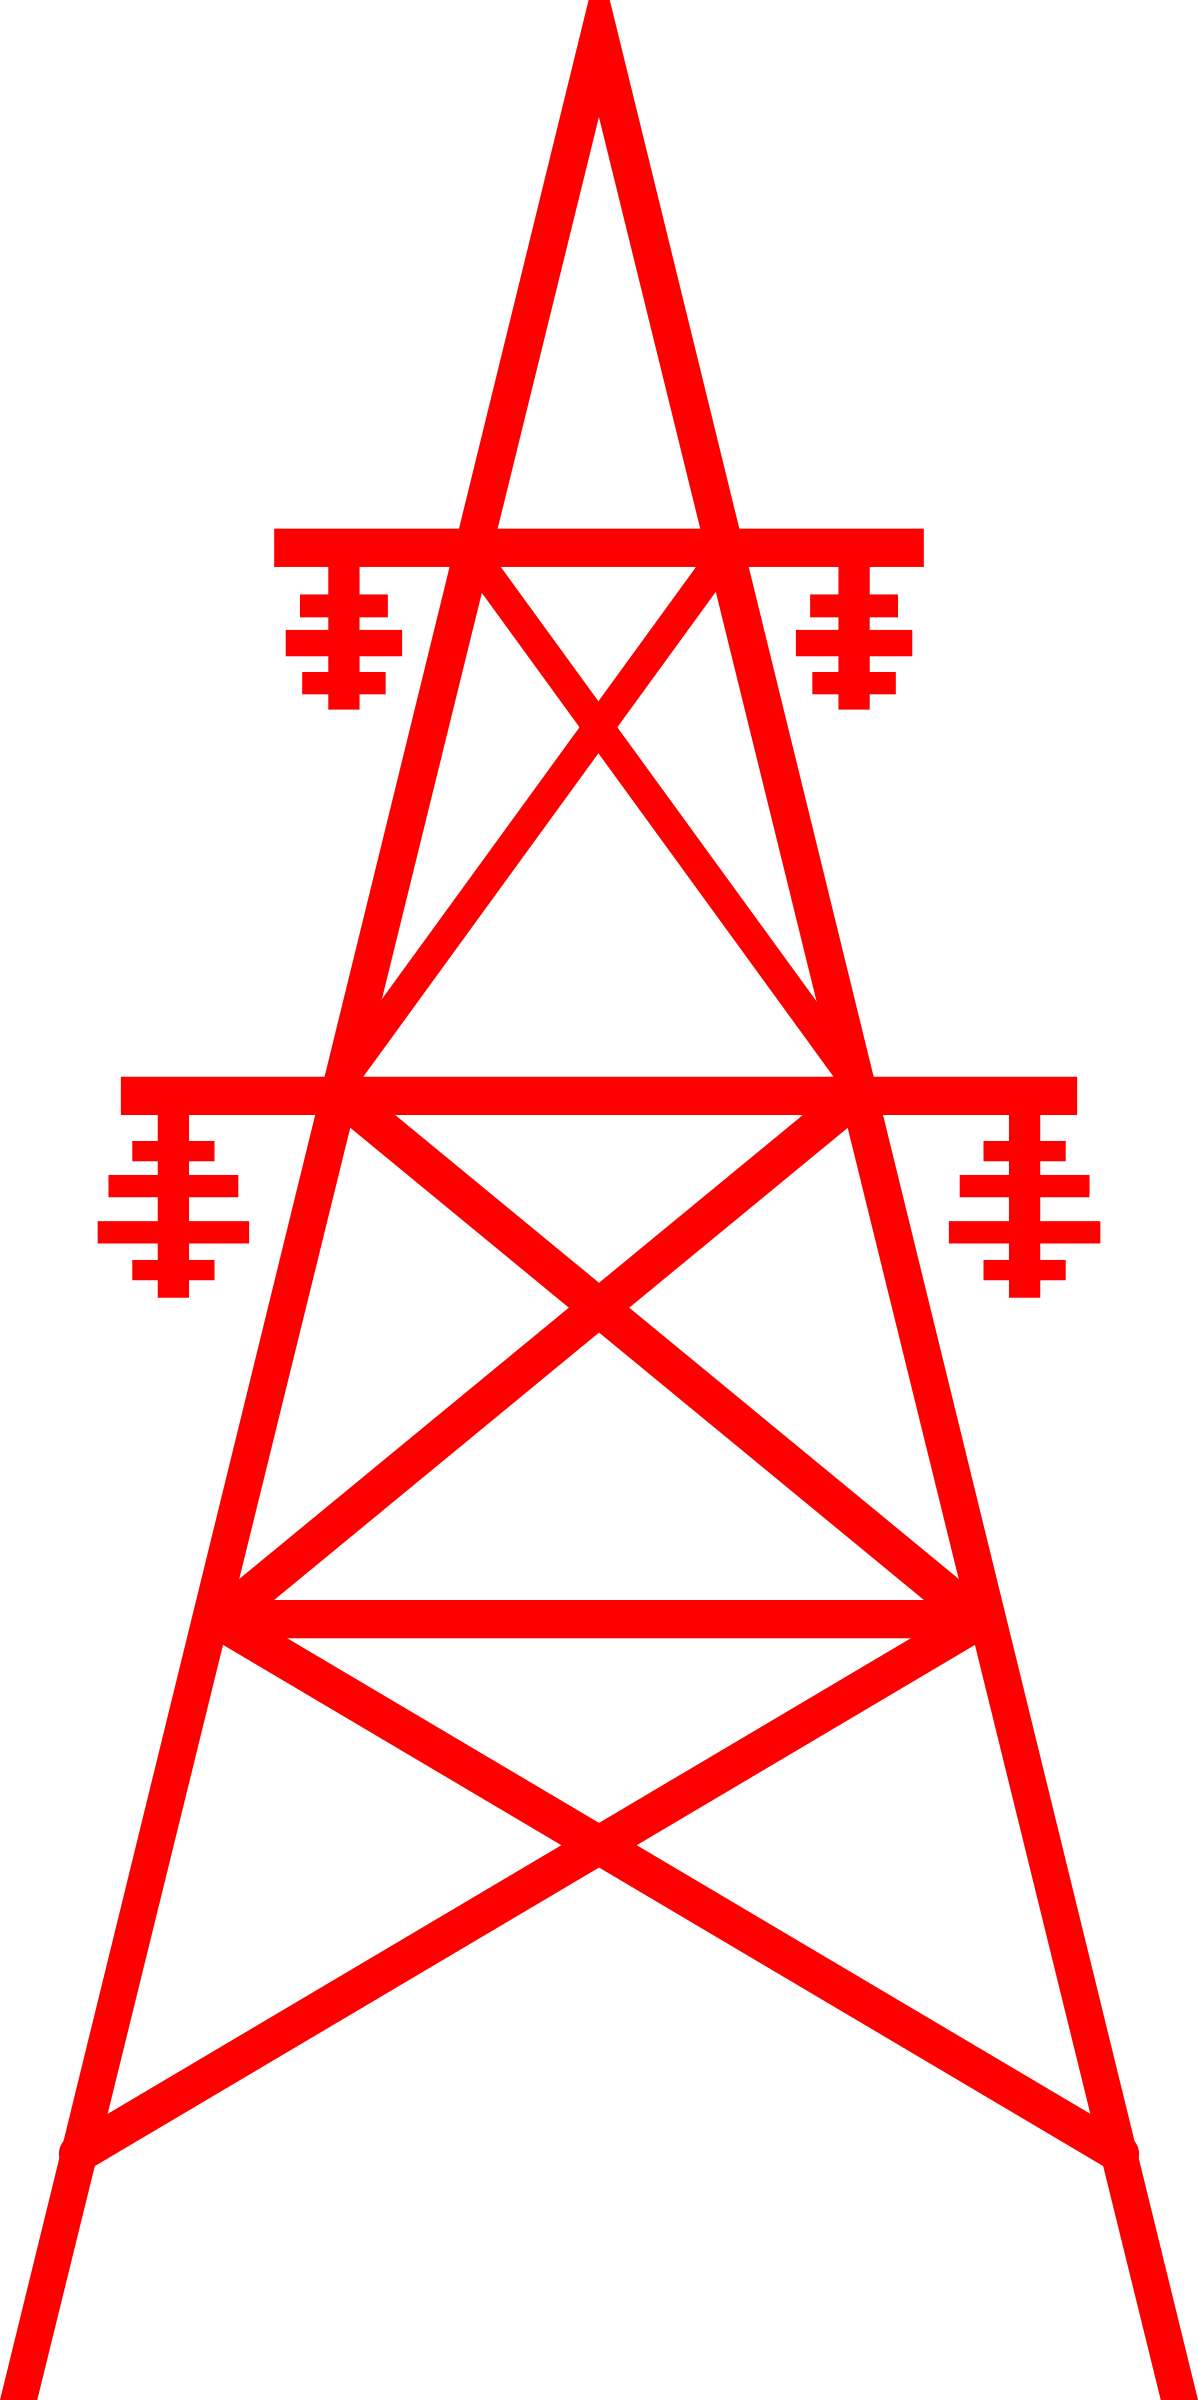 Transmission towers clipart 20 free Cliparts | Download images on